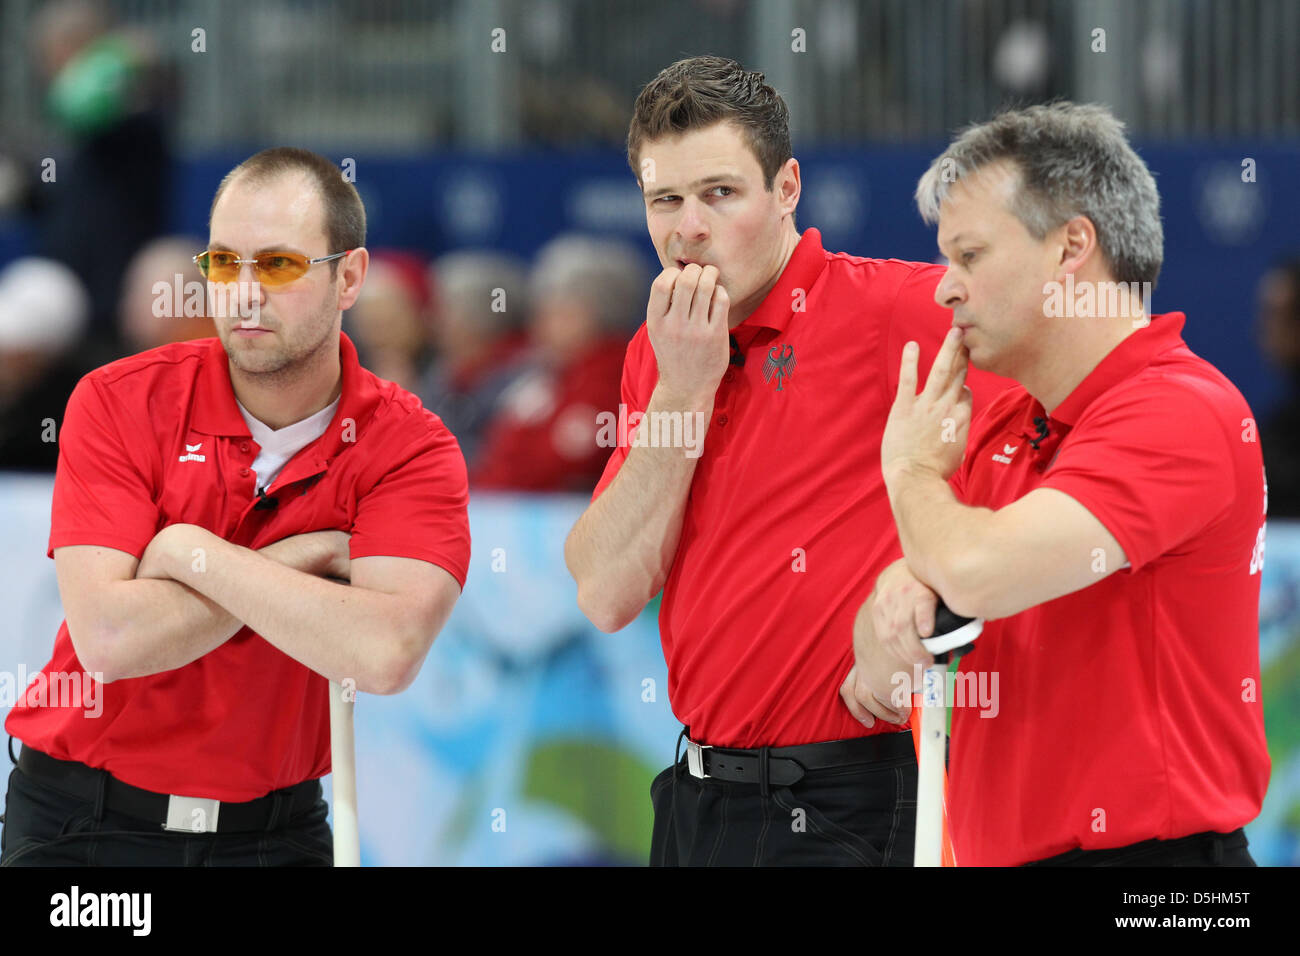 Andreas Kempf (R-L), Andy Lang and Holger Hoehne of team Germany talk during their curling men's round robin session 4 against Norway during the Vancouver 2010 Olympic Games at the Vancouver Olympic Center in Vancouver, Canada 18 February 2010. Photo: Daniel Karmann  +++(c) dpa - Bildfunk+++ Stock Photo